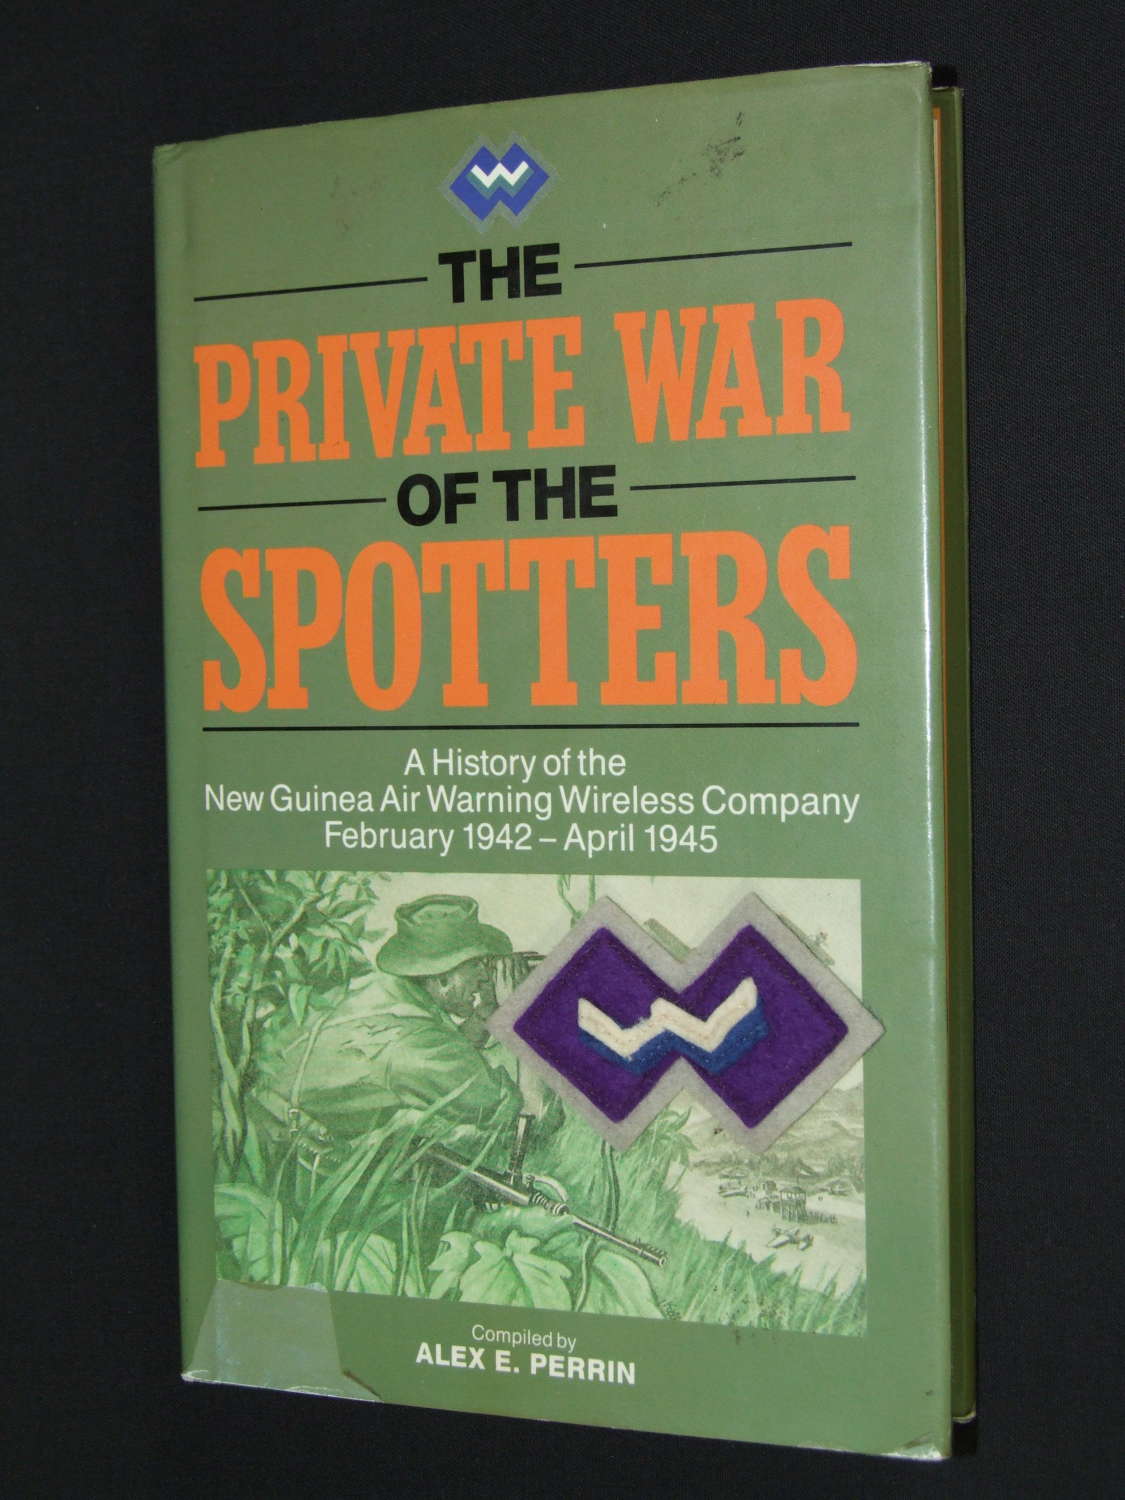 Australian WW11 Coastal Spotter Formation Sign and Book